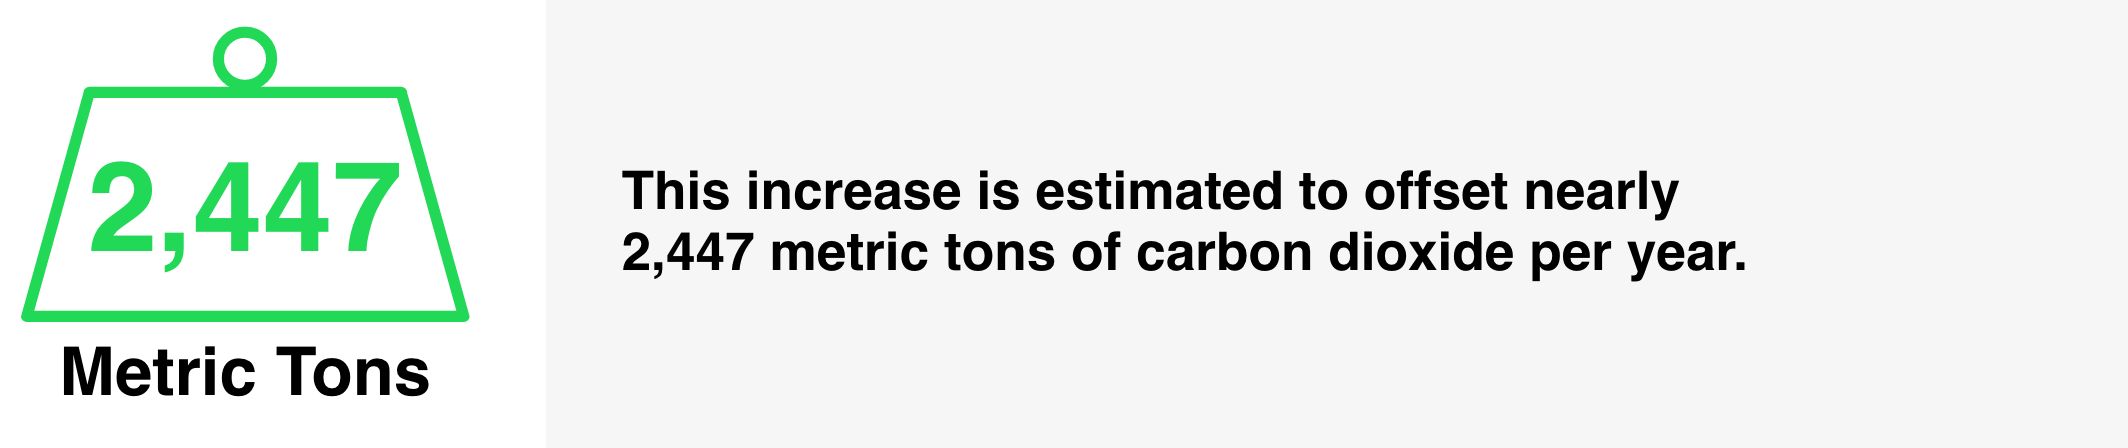 This increase is estimated to offset nearly 2,447 metric tons of carbon dioxide per year.